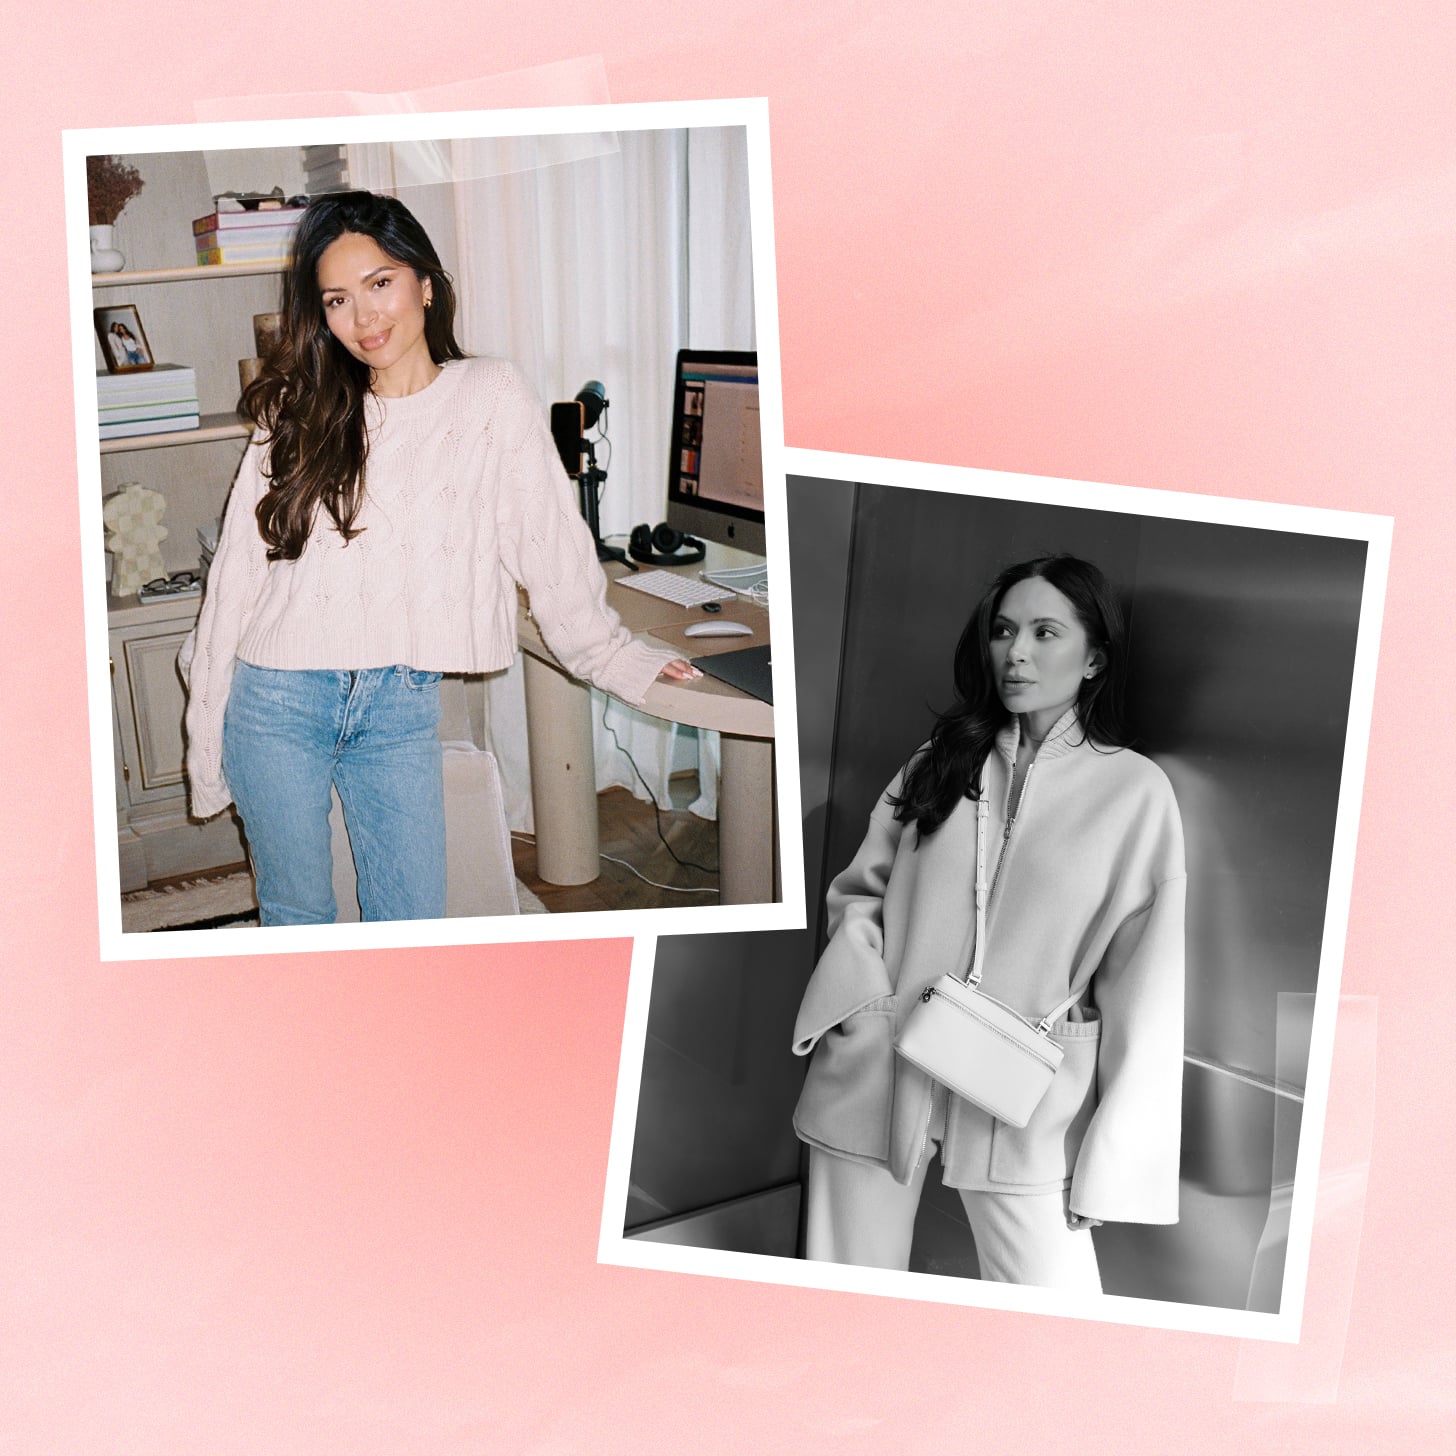 What Marianna Hewitt Packed for New York Fashion Week